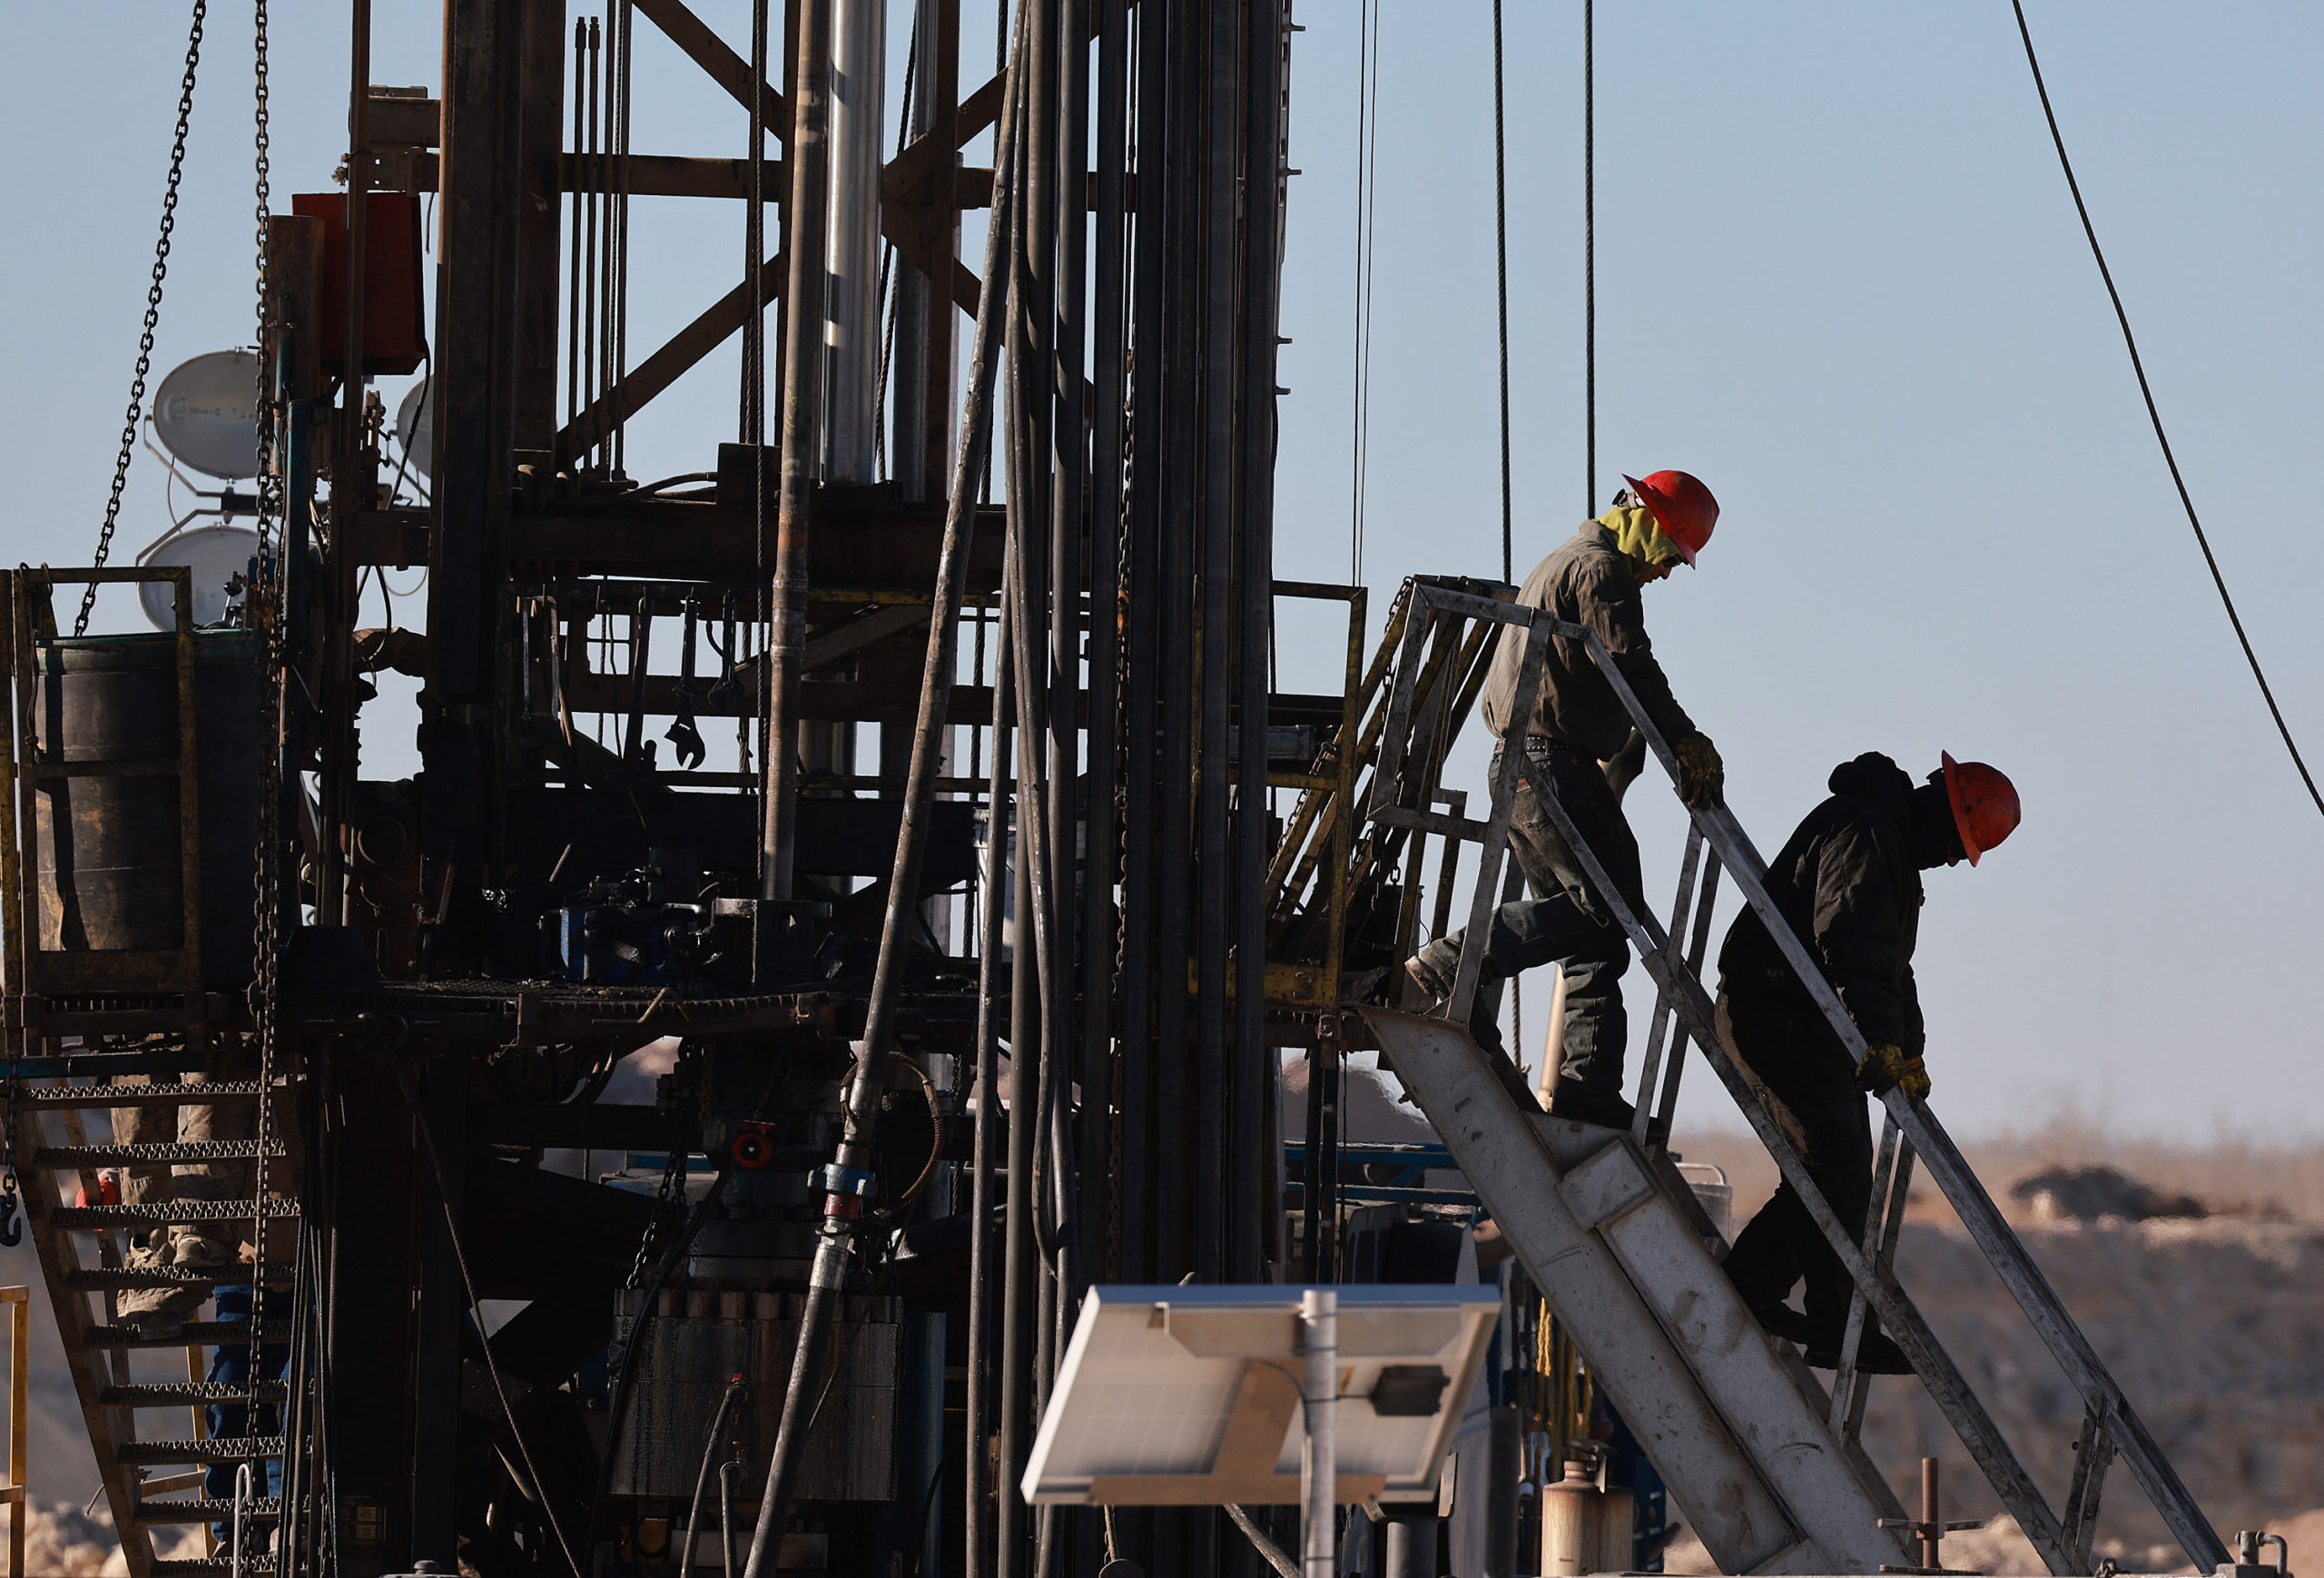 Workers place pipe into the ground on an oil drilling rig in the Permian Basin oil field on March 12 in Midland, Texas. (Joe Raedle/Getty Images)